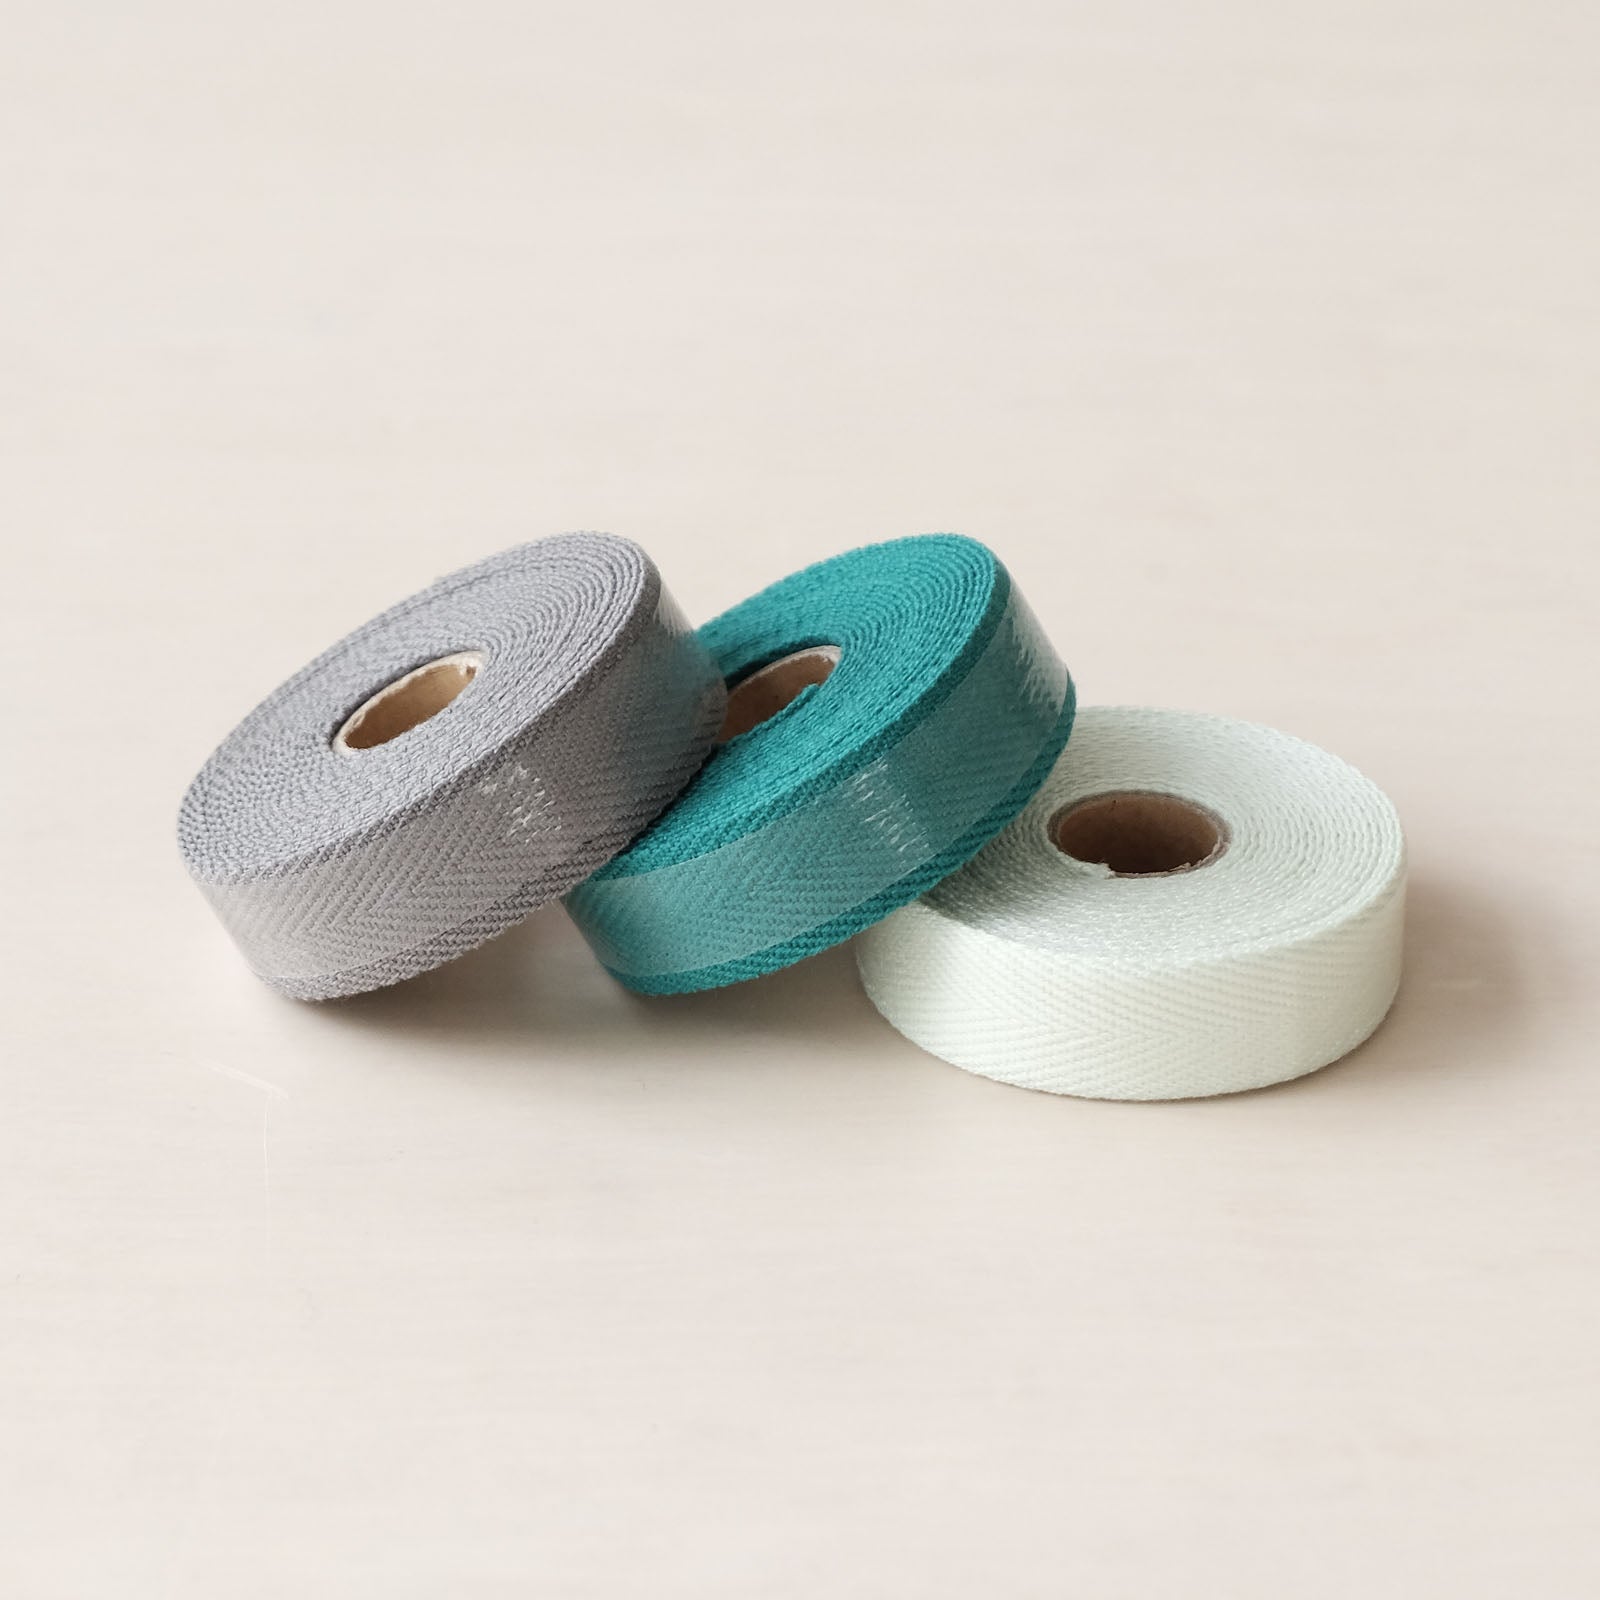 Certified Cloth Bar Tape